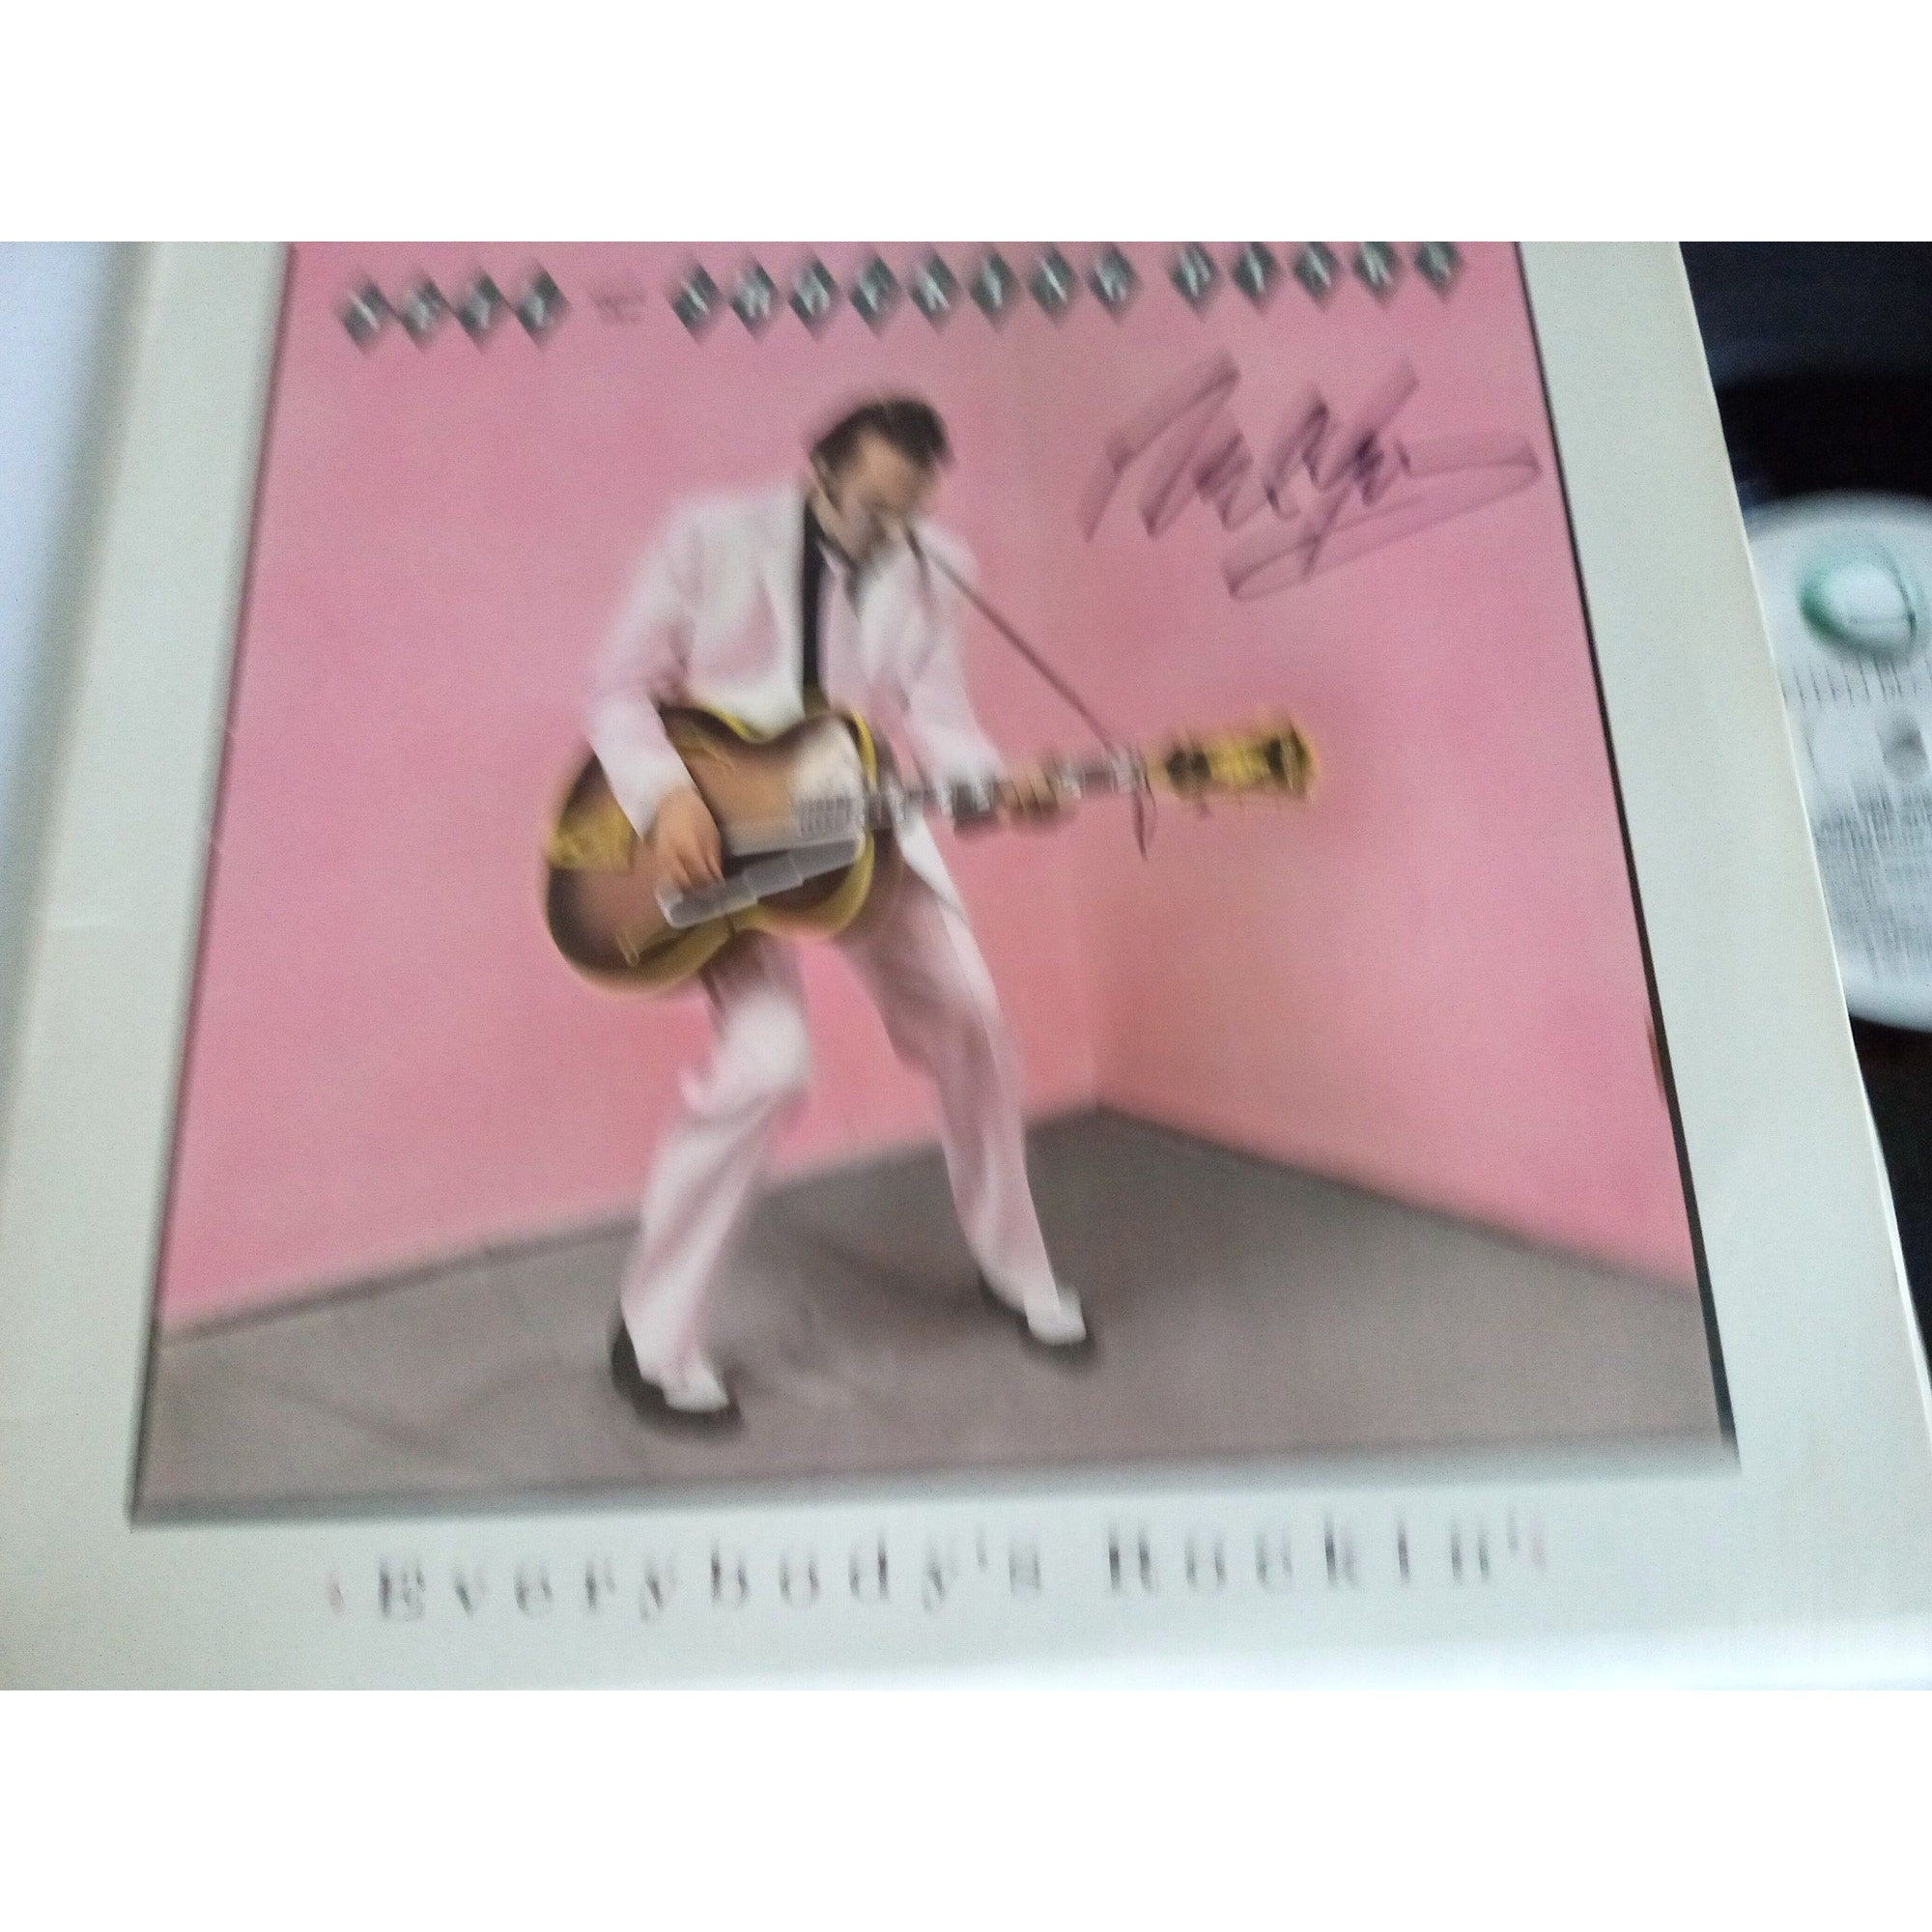 Neil Young Everybody's Rockin LP signed with proof